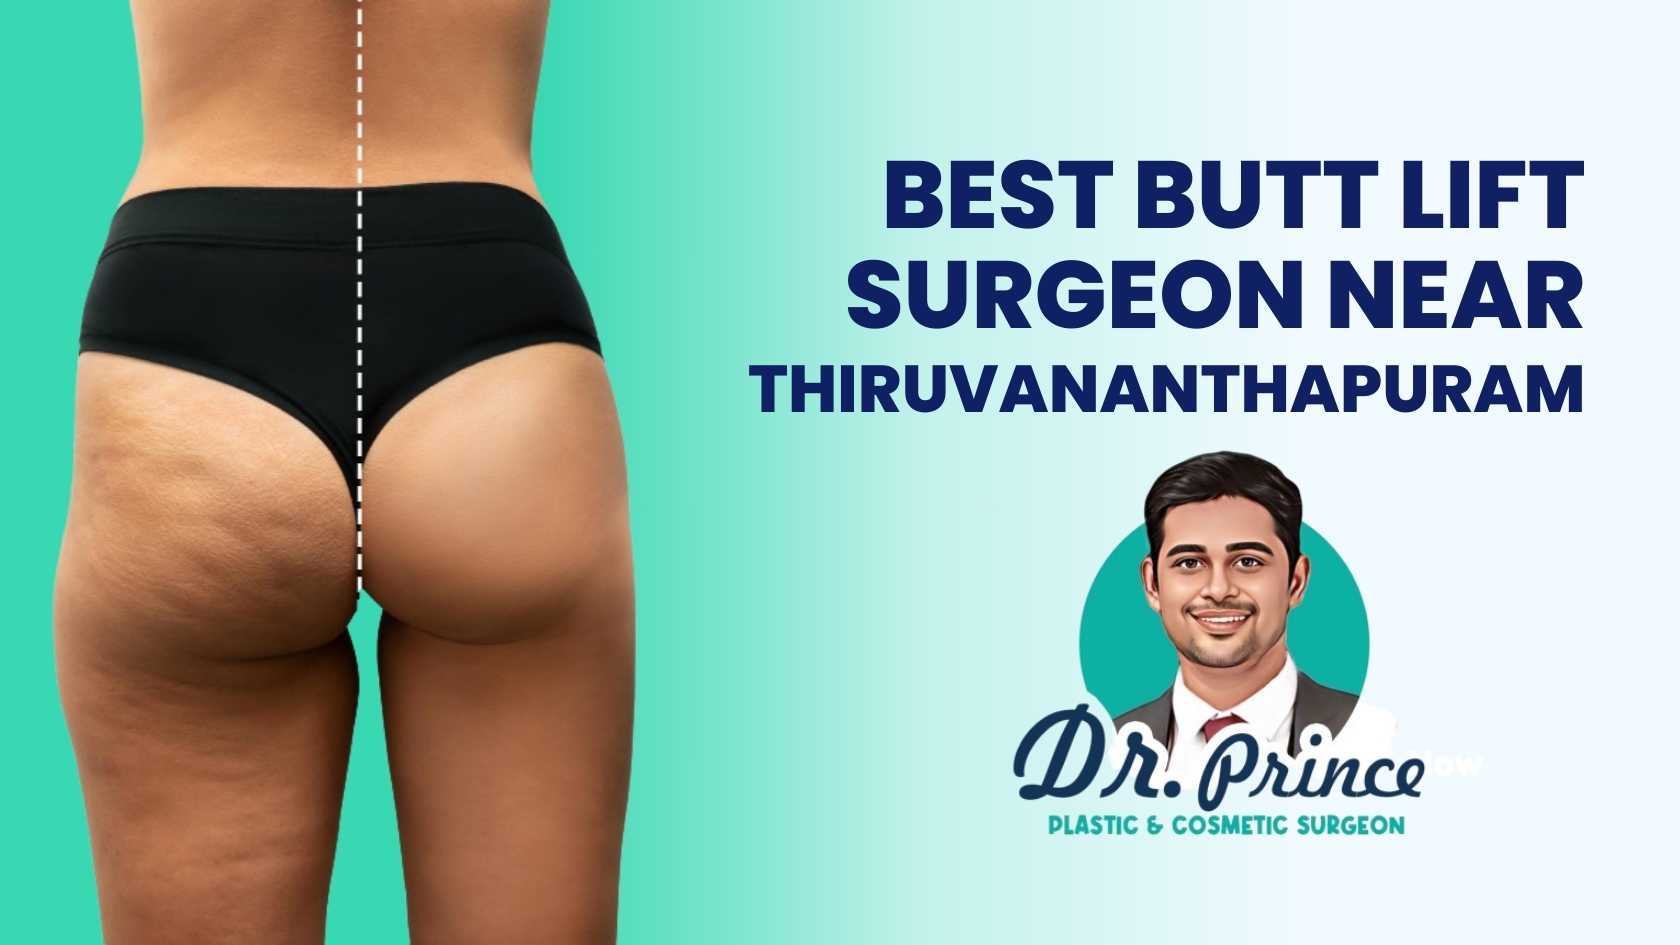 Butt Lift Surgery - Sculpting Curves with Dr. Prince